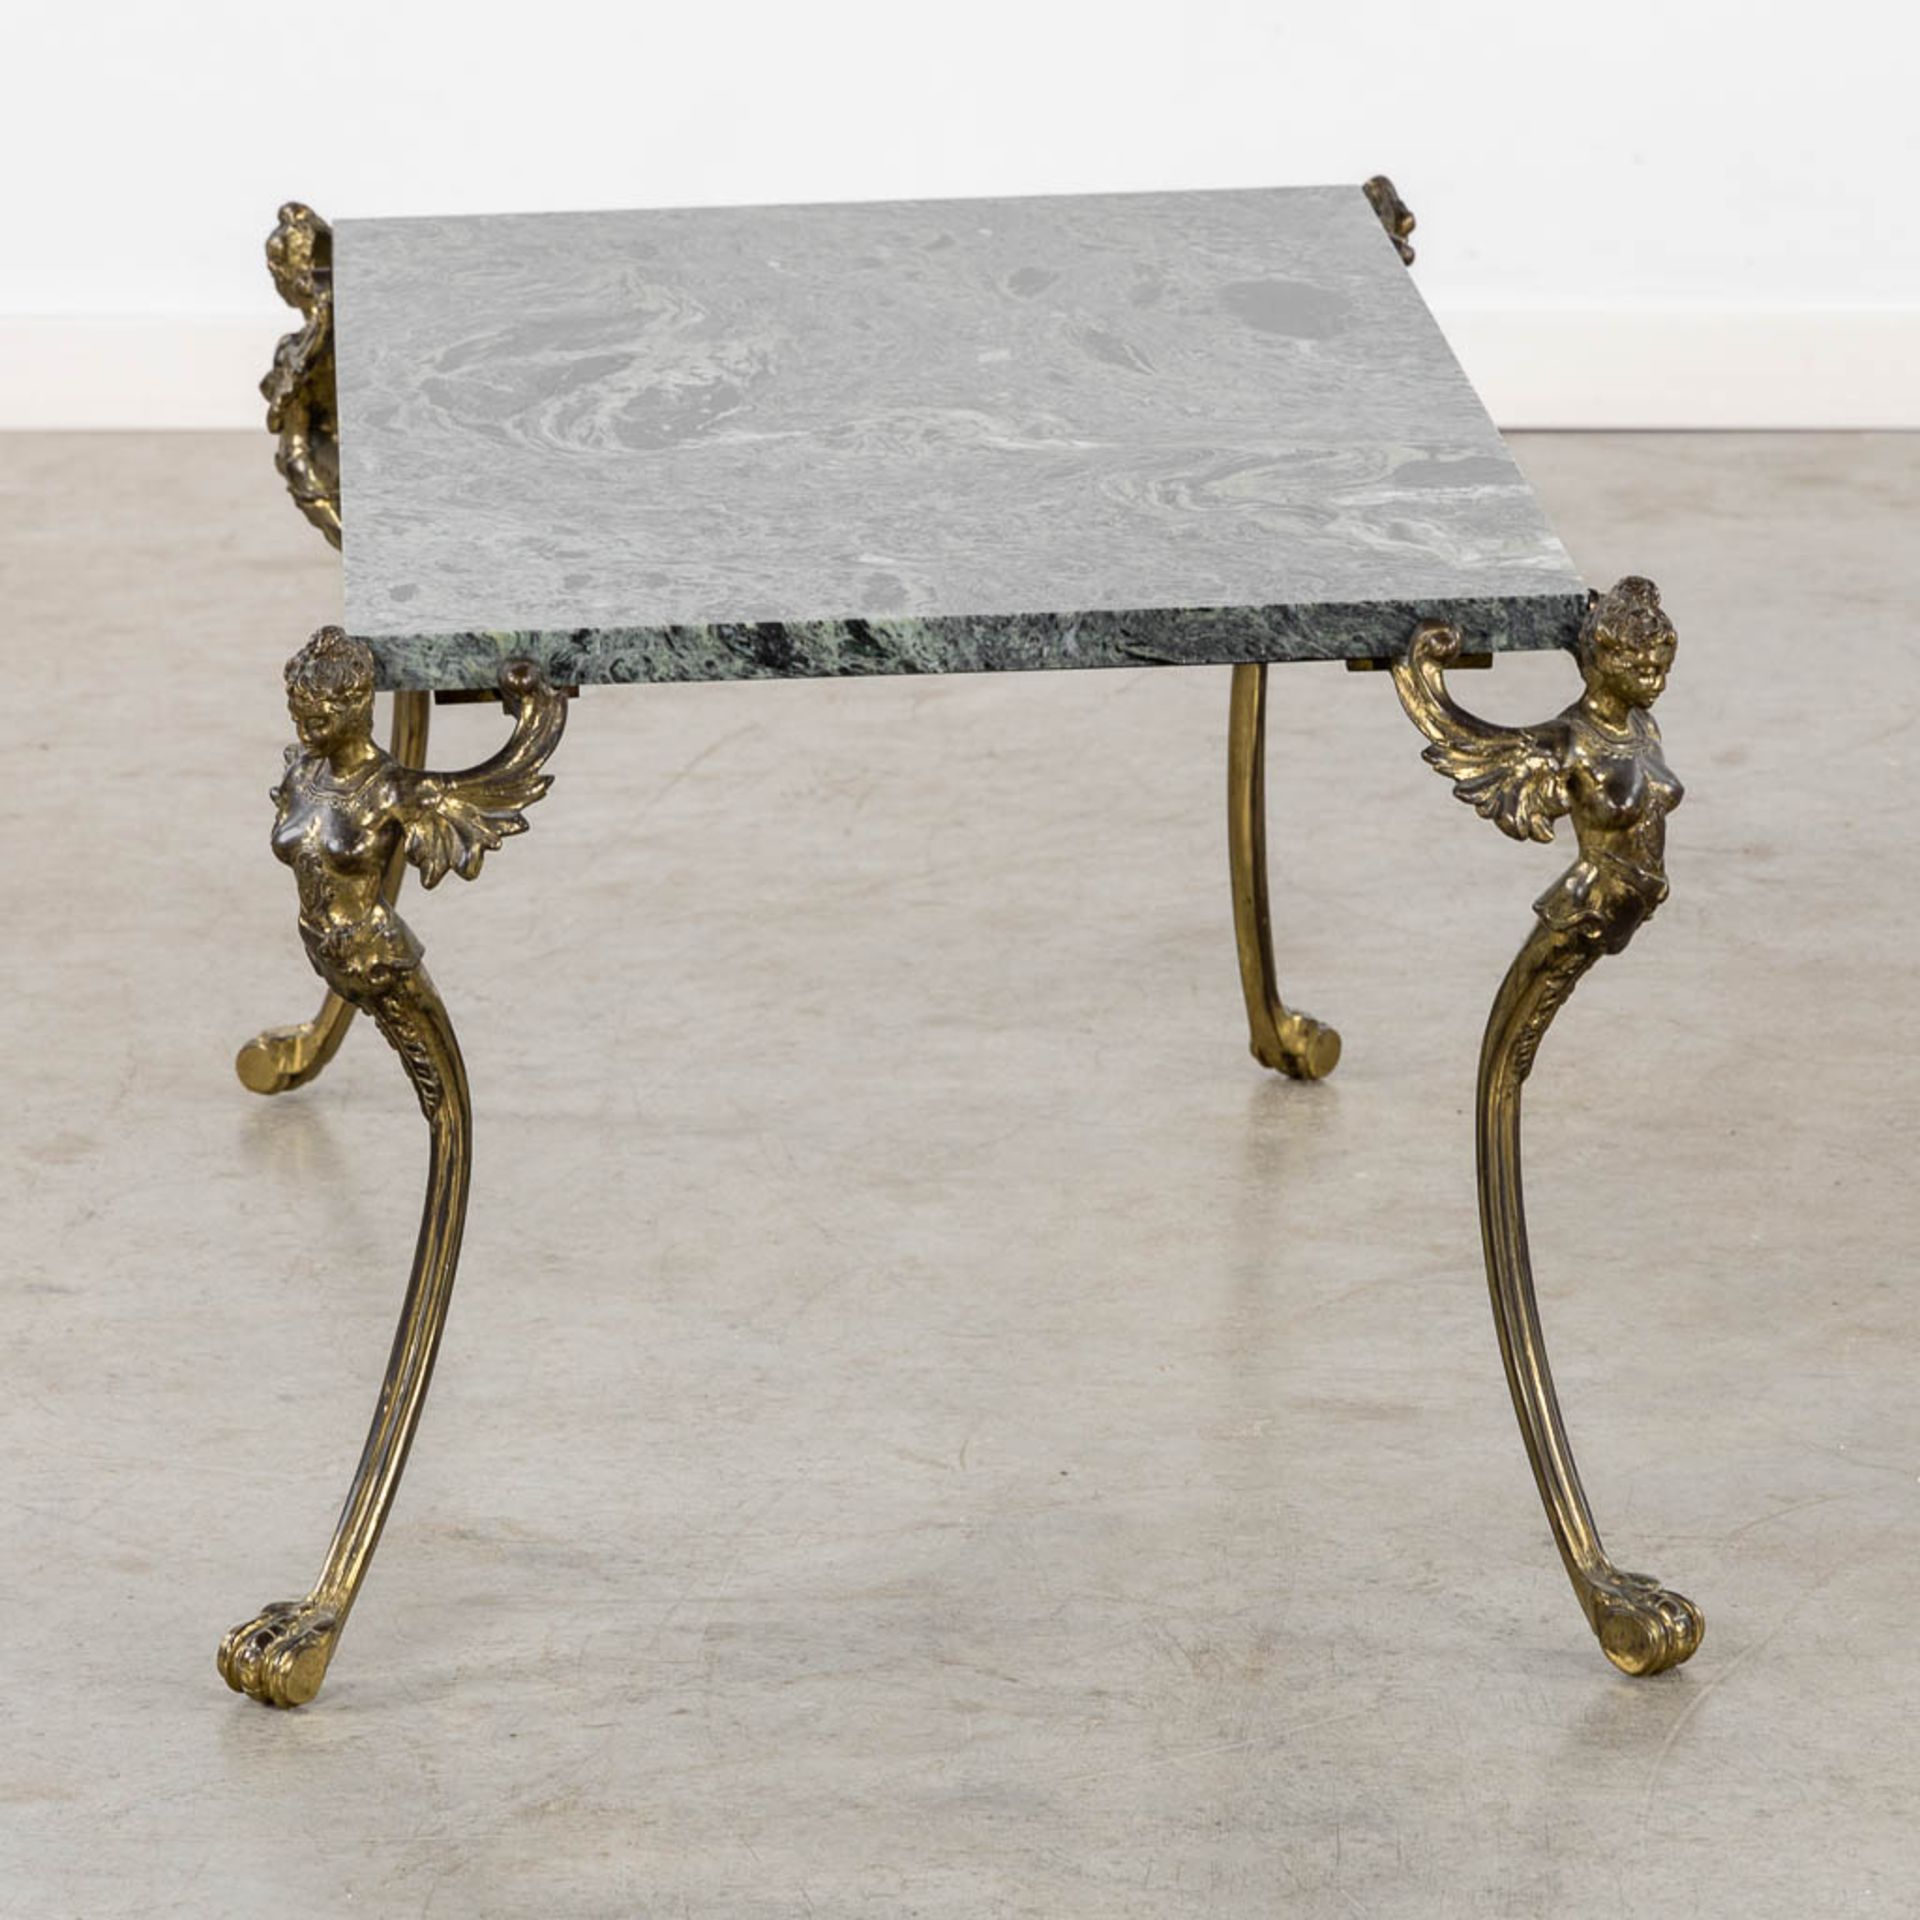 A marble and bronze coffee table, added a floorlamp. Circa 1960. (L:52 x W:101 x H:41 cm) - Image 15 of 19